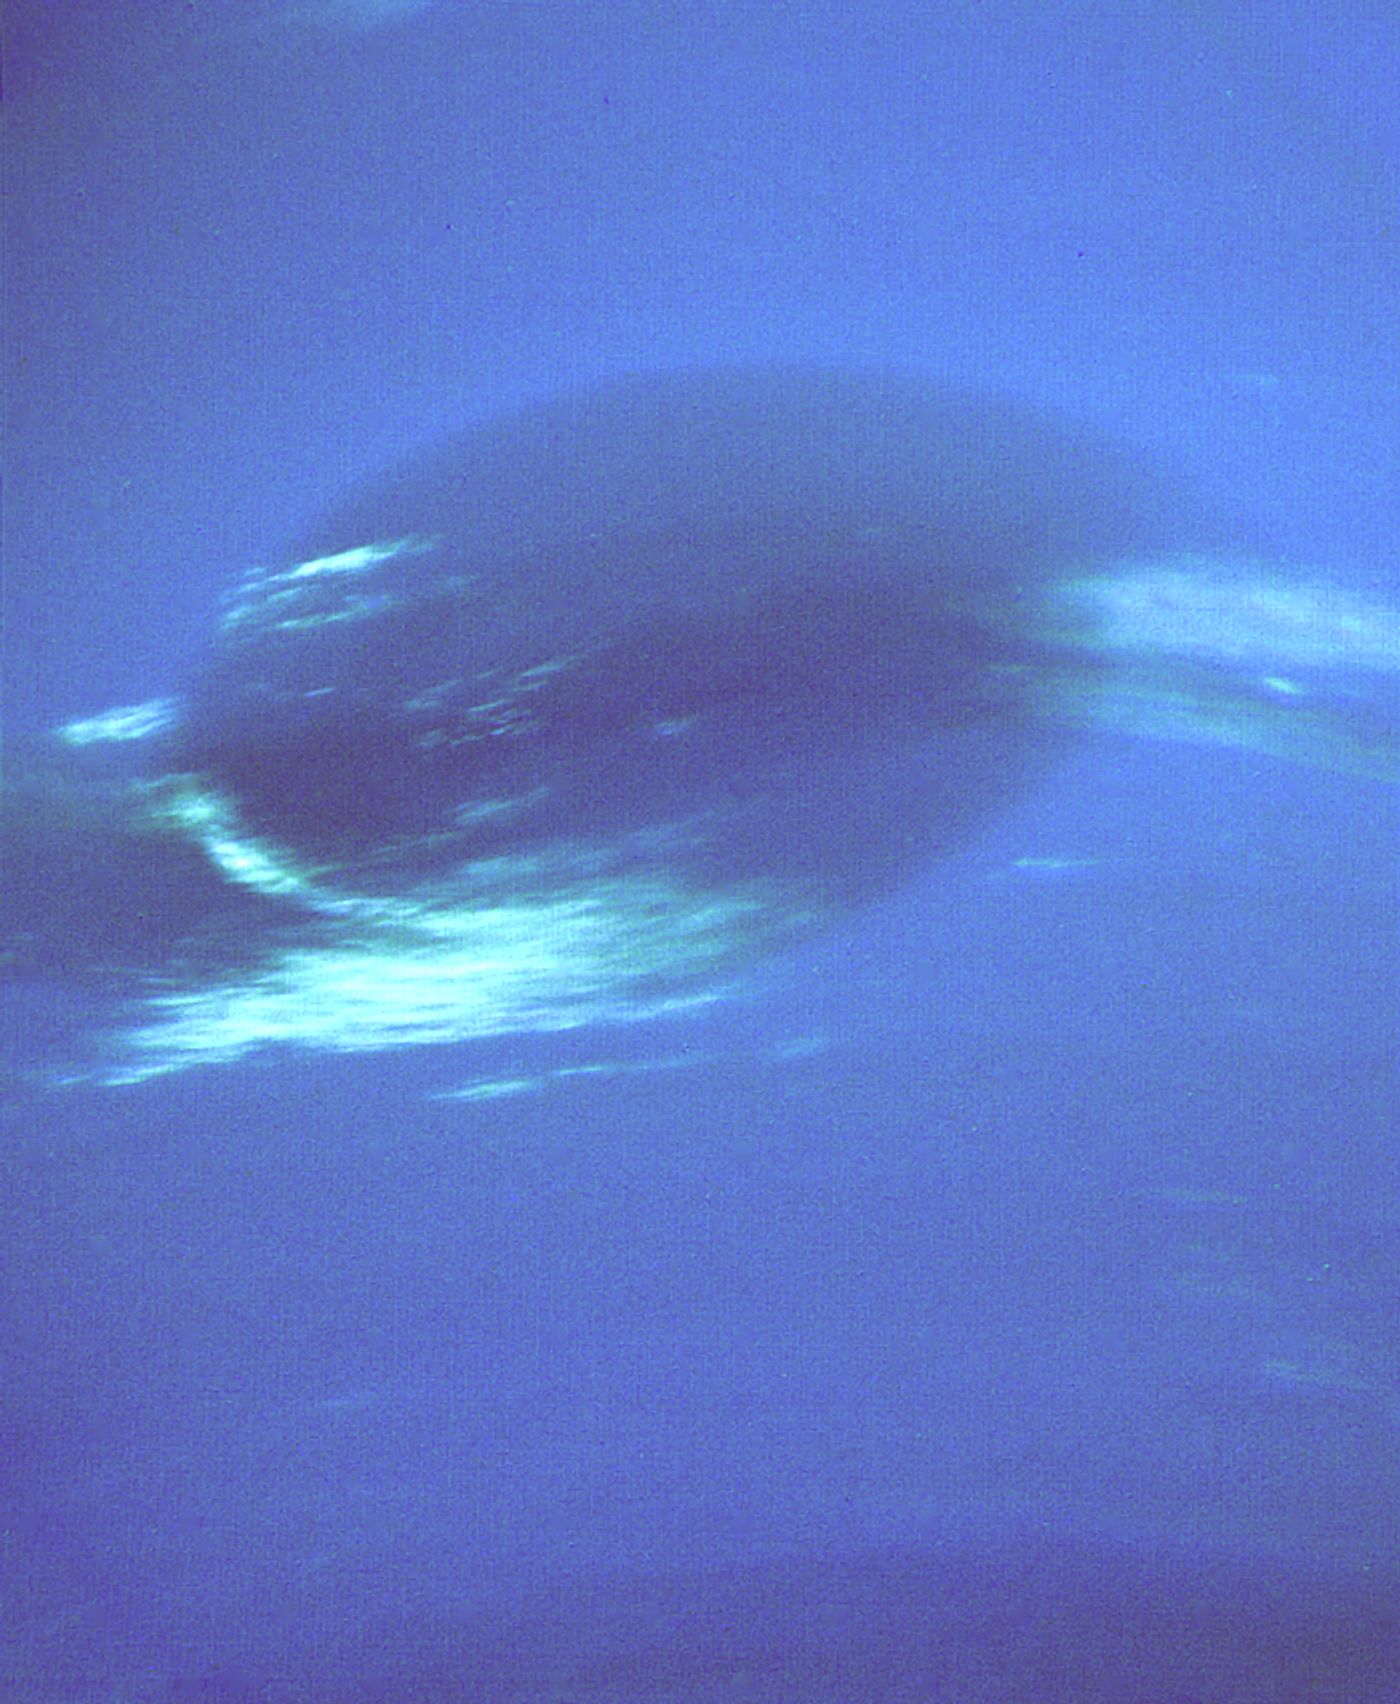 The Great Dark Spot of Neptune imaged by Voyager 2. (Image Credit: NASA JPL)